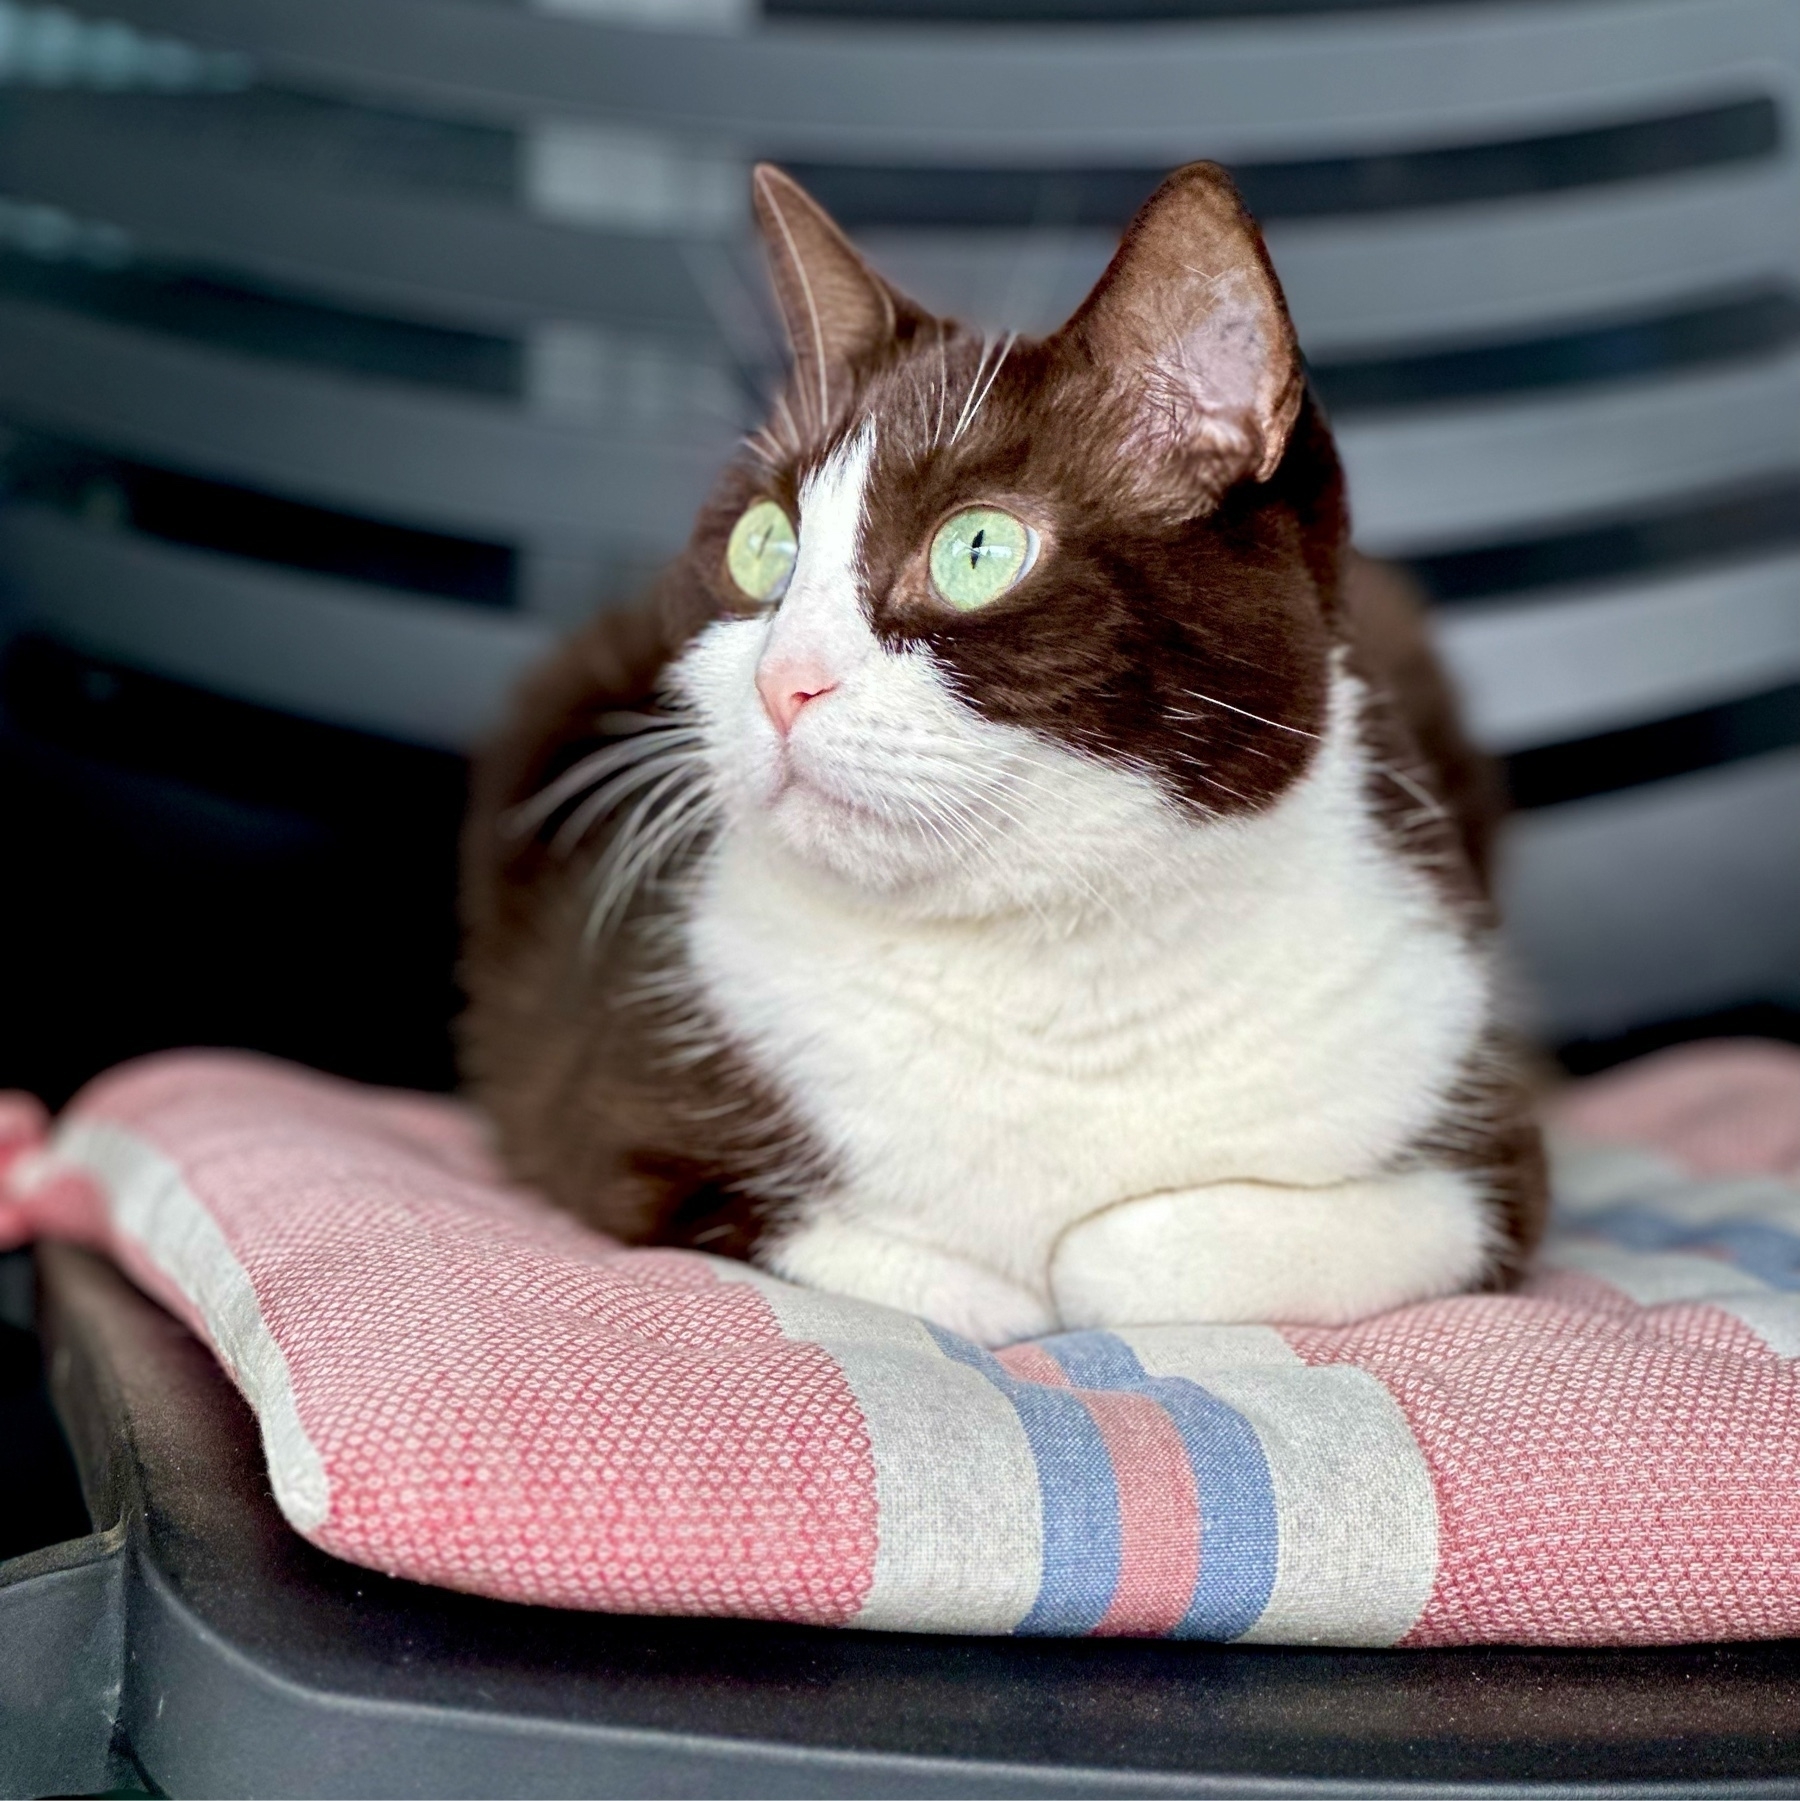 A black and white cat sitting on a faded pink, white and blue striped cushion in a chair. The cat is looking up and to the right. Her body and head are black but her chin and belly and paws are white.